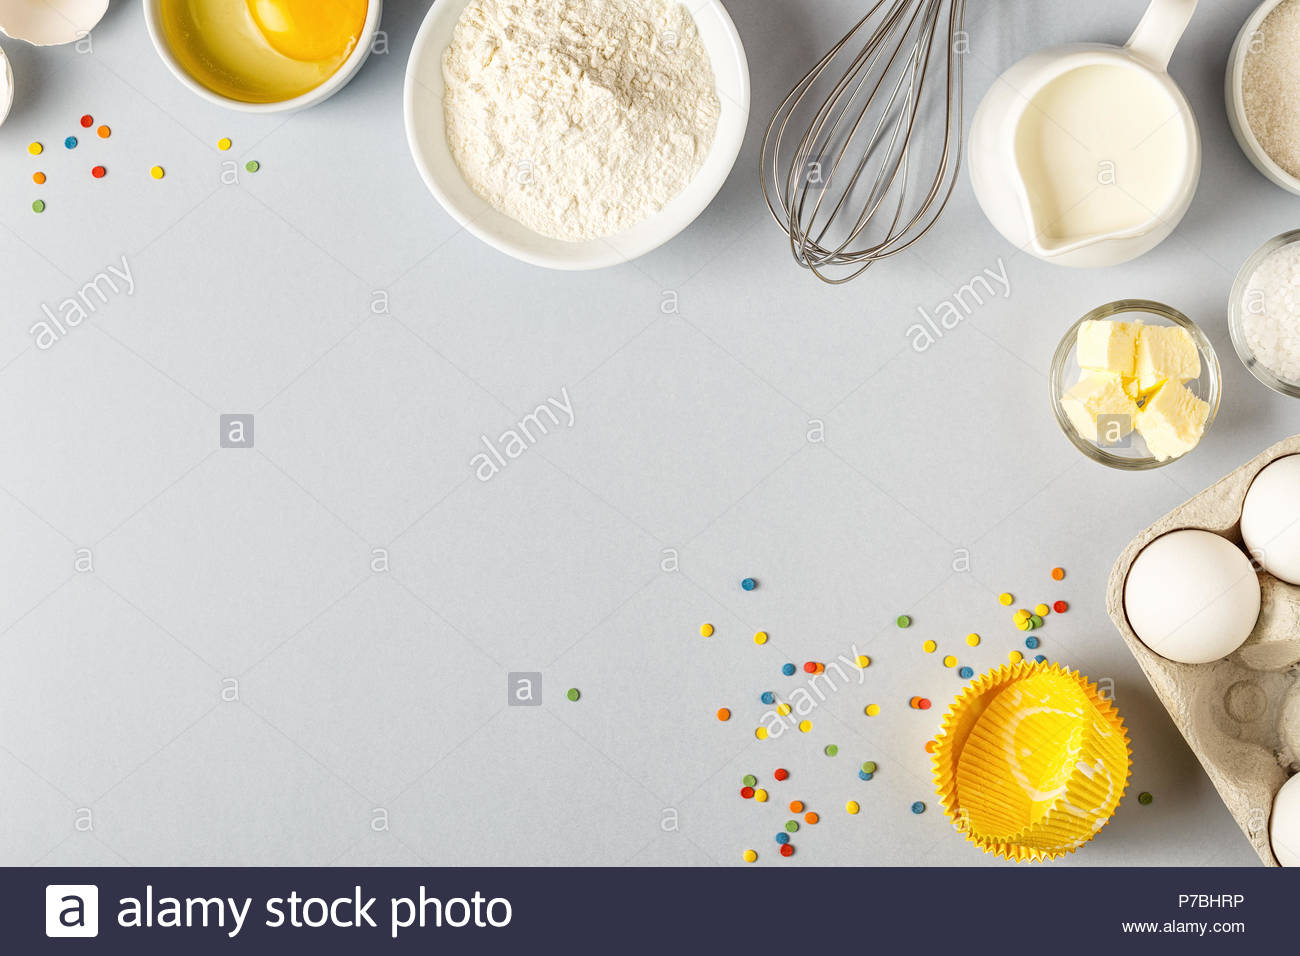 Background With Ingredients For Cooking Baking Flat Lay Top